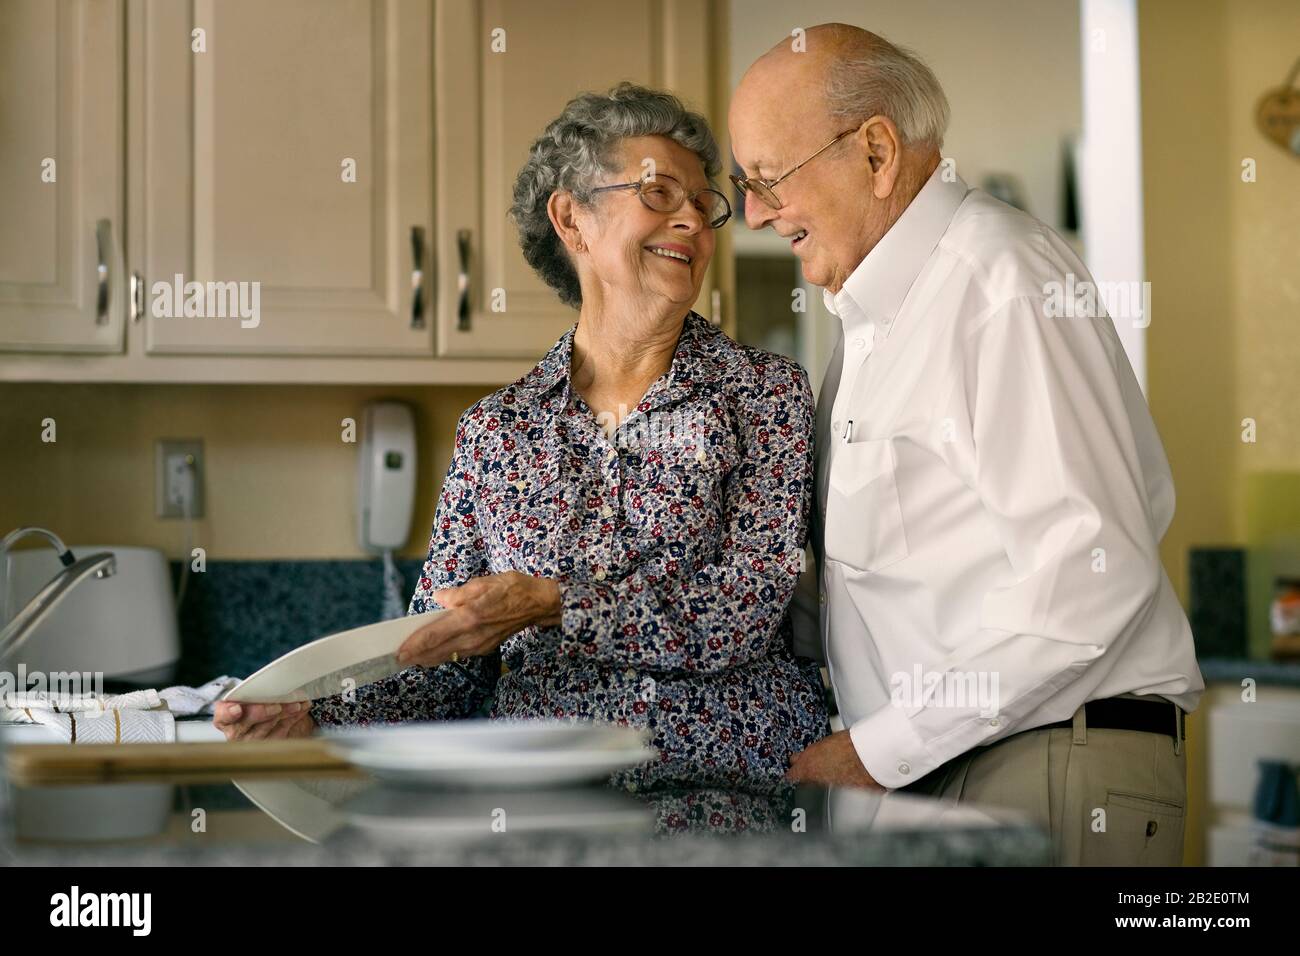 Happy elderly couple share an affectionate moment while washing dishes together Stock Photo